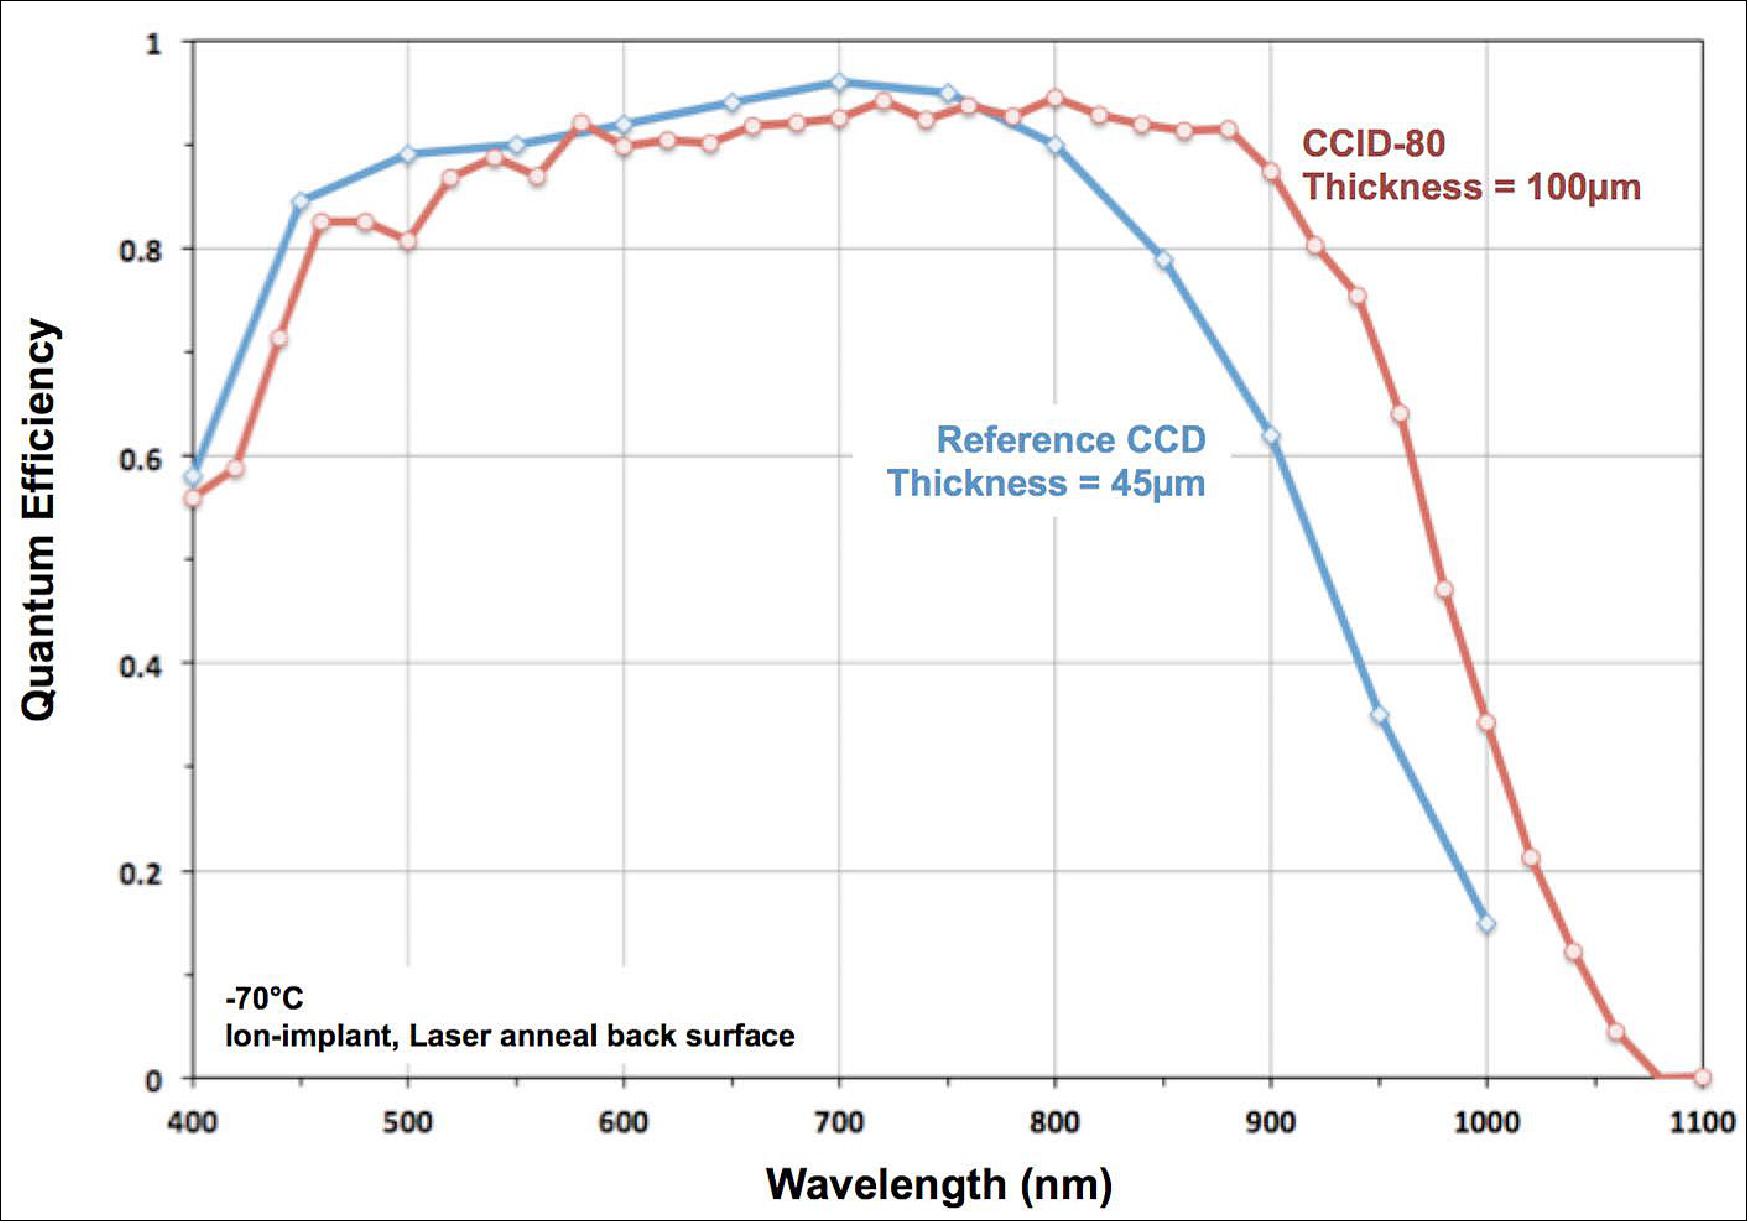 Figure 68: Measured quantum efficiency for the 100 µm thick CCID-80 device compared to a 45 µm thick reference MIT/LL CCD (image credit: MIT/LL)